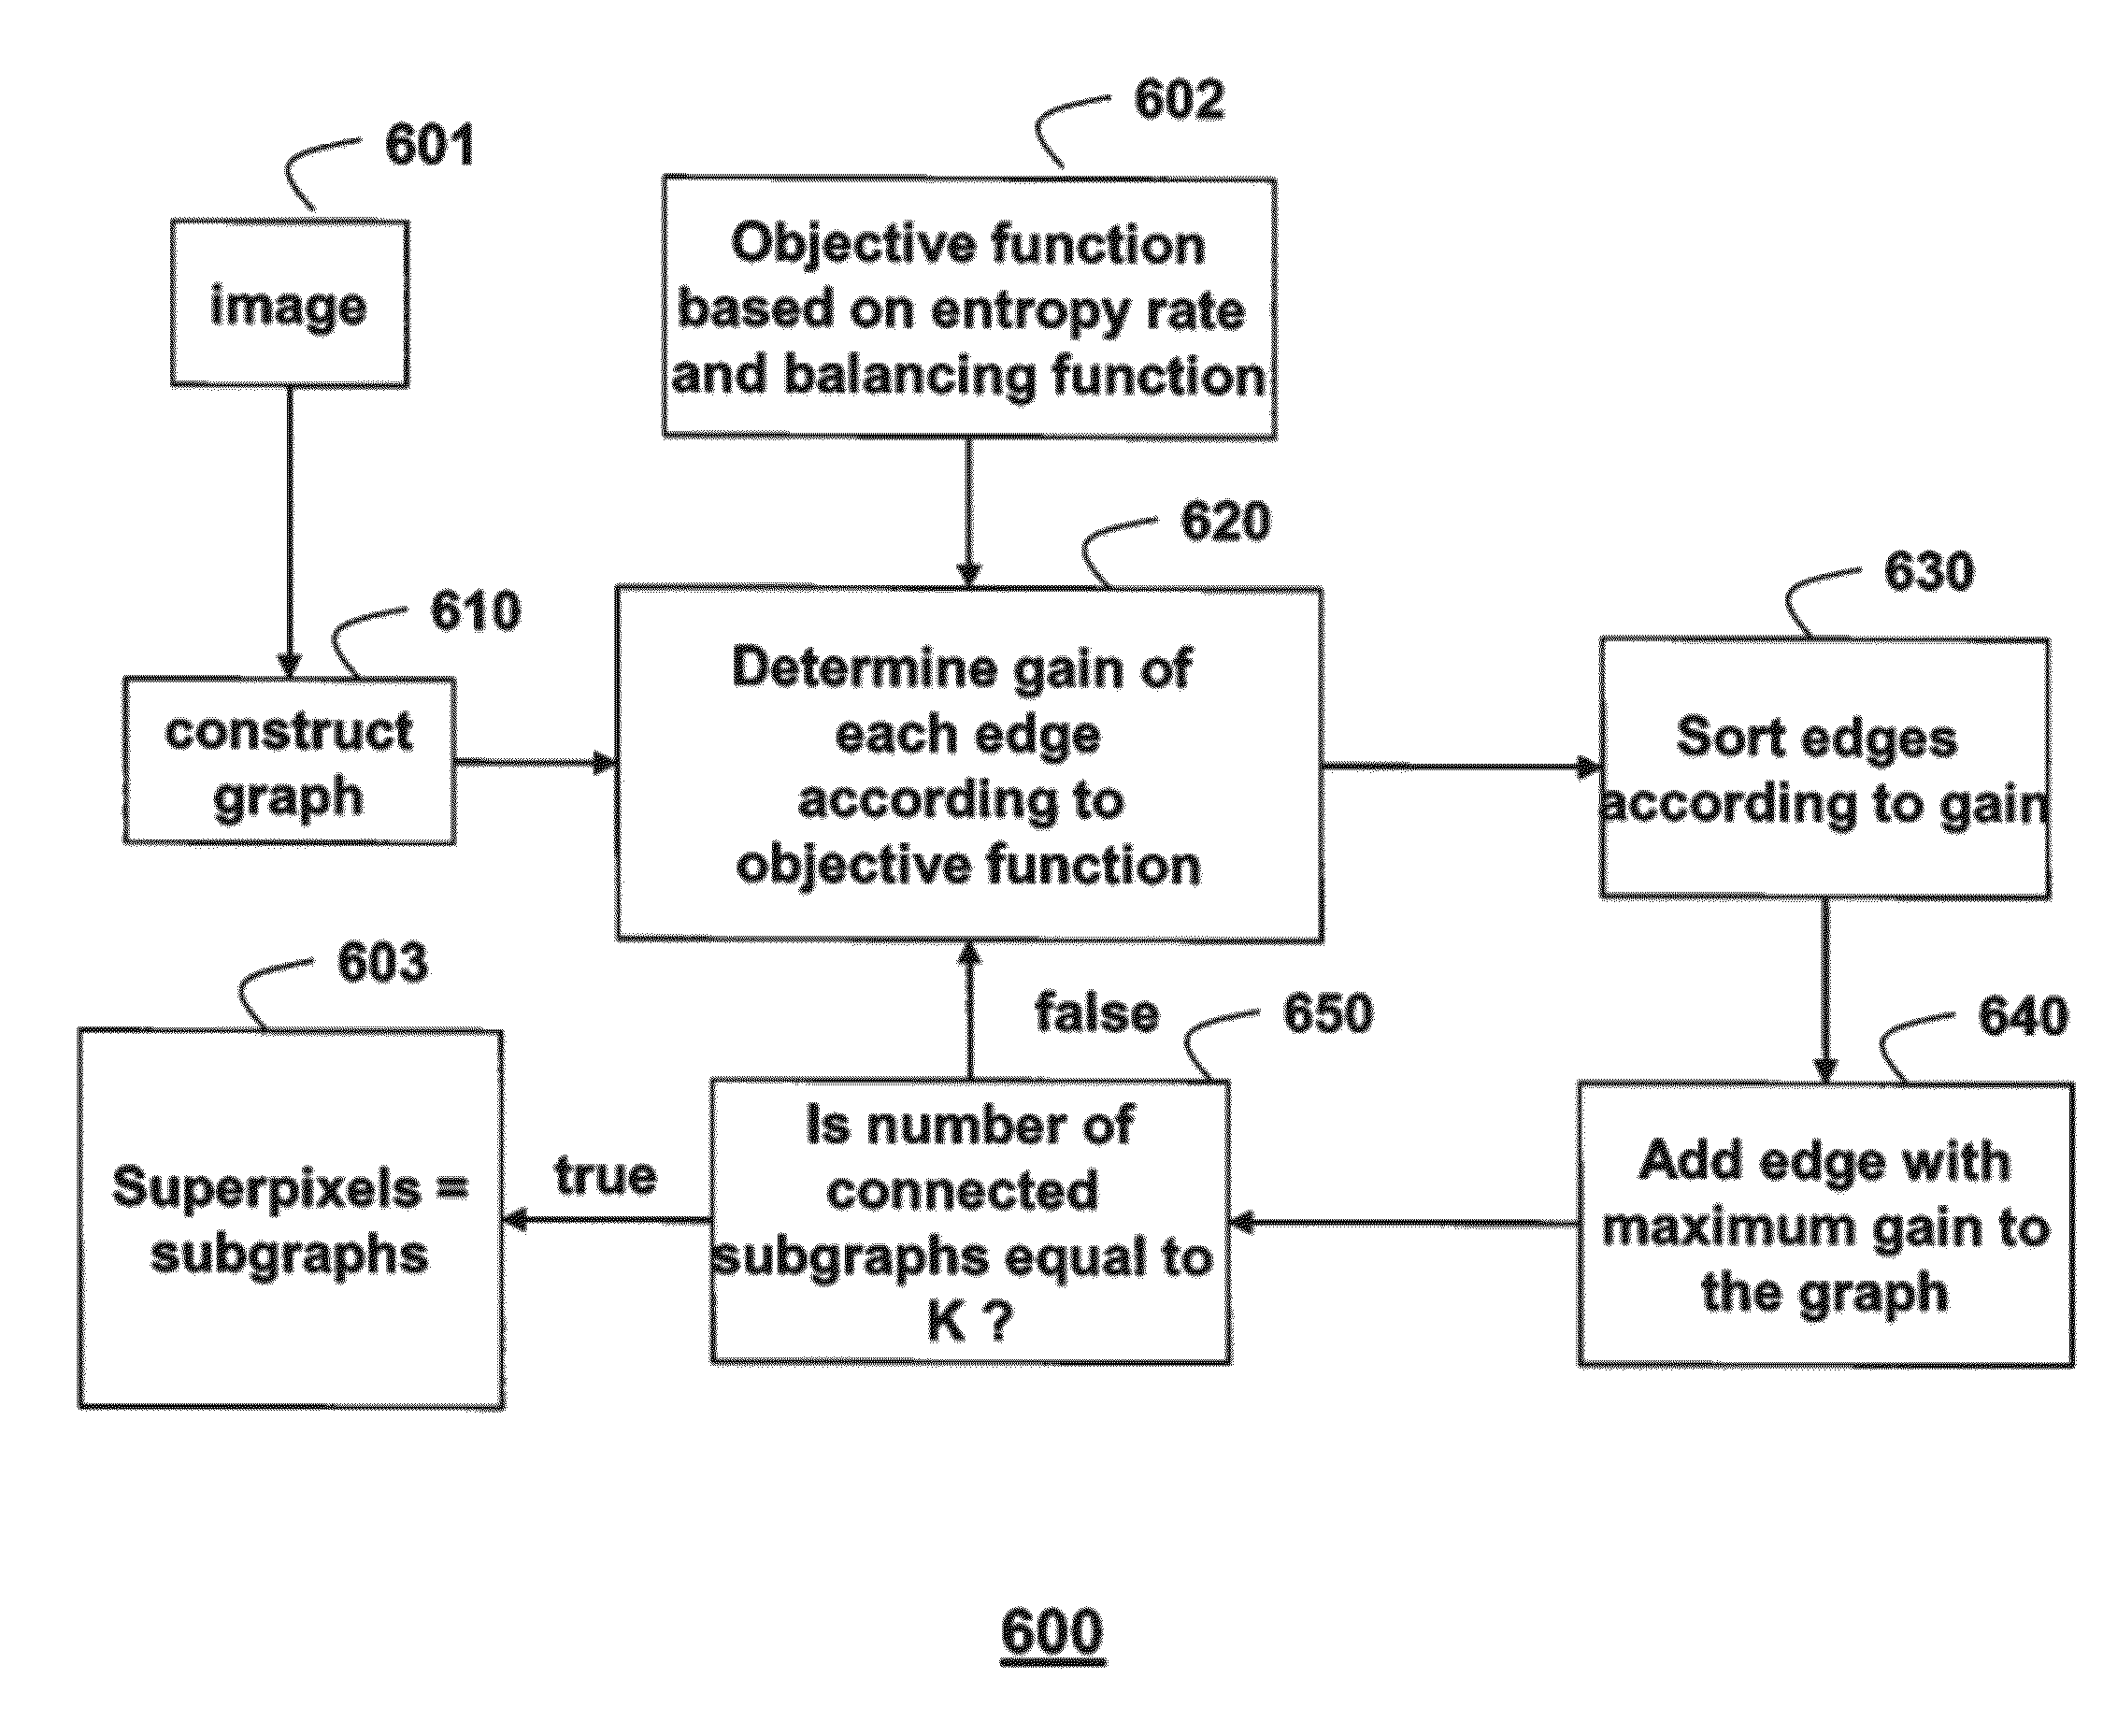 Method for segmenting images using superpixels and entropy rate clustering